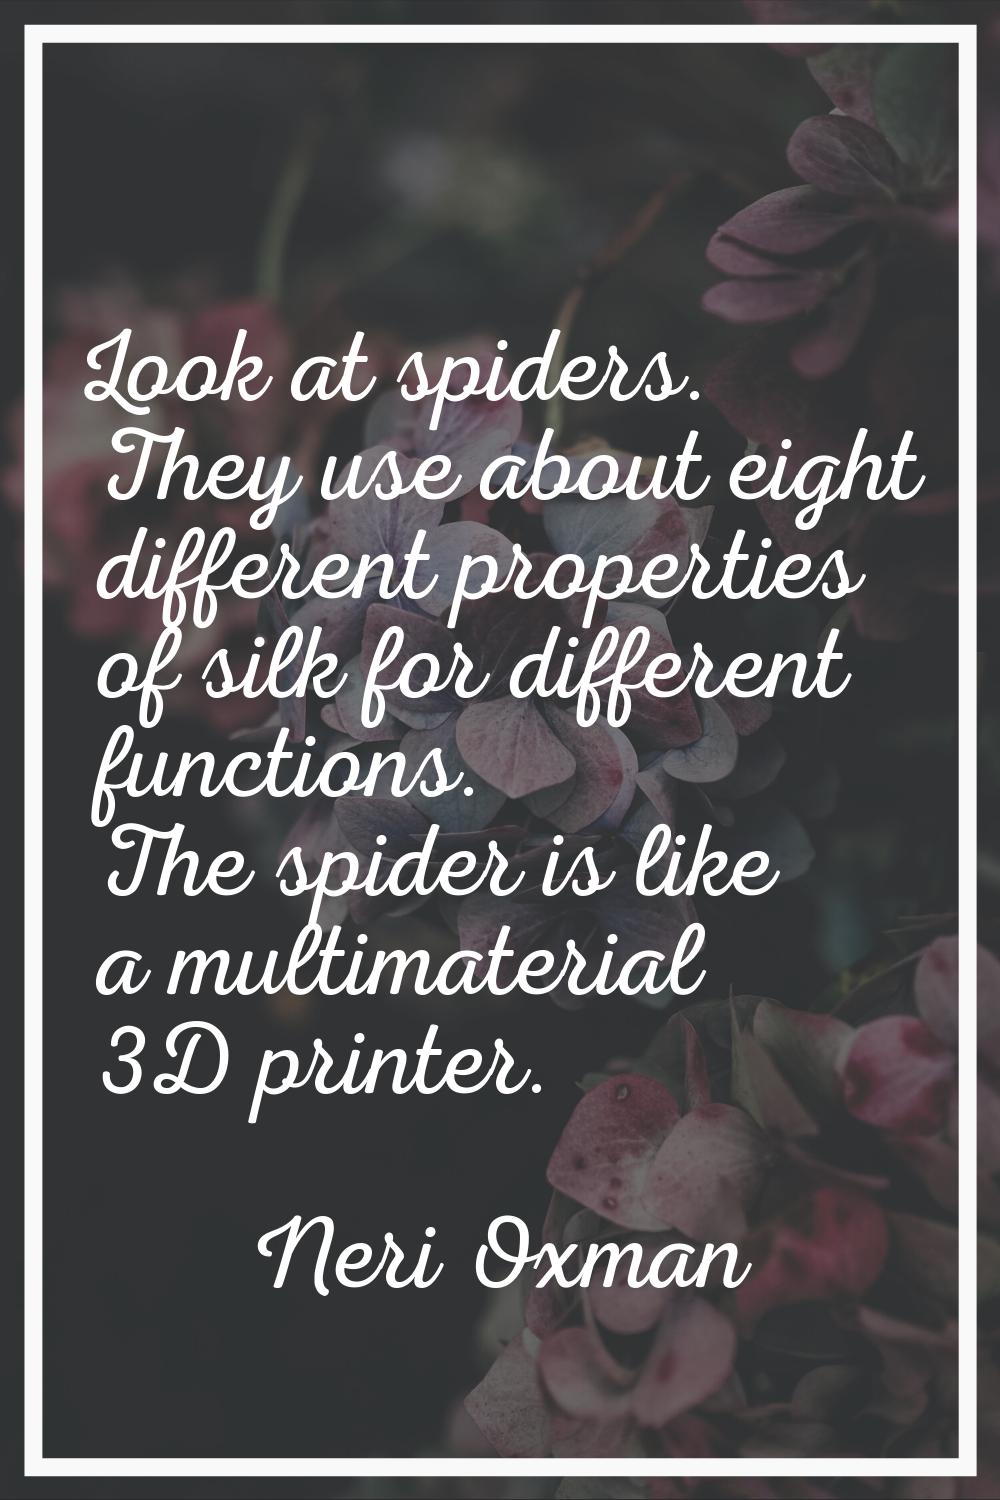 Look at spiders. They use about eight different properties of silk for different functions. The spi